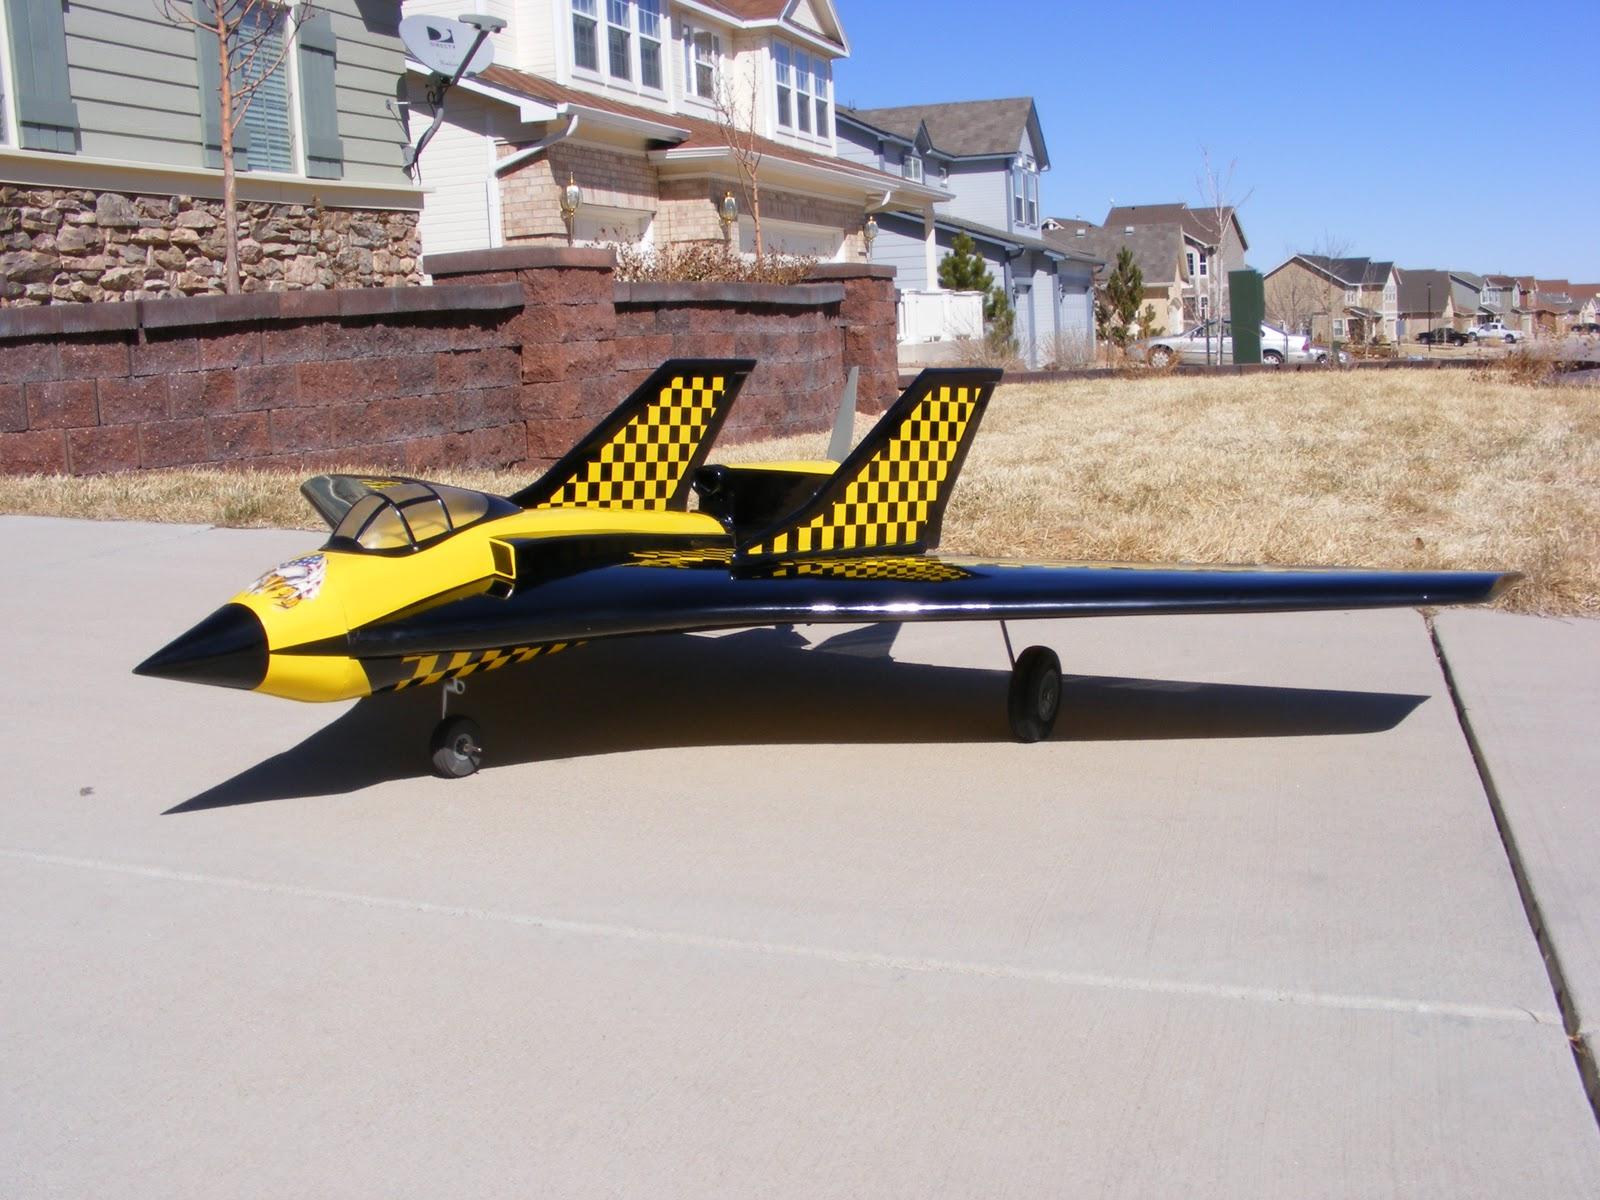 Stryker Rc Plane: Impressive Features of the Stryker RC Plane